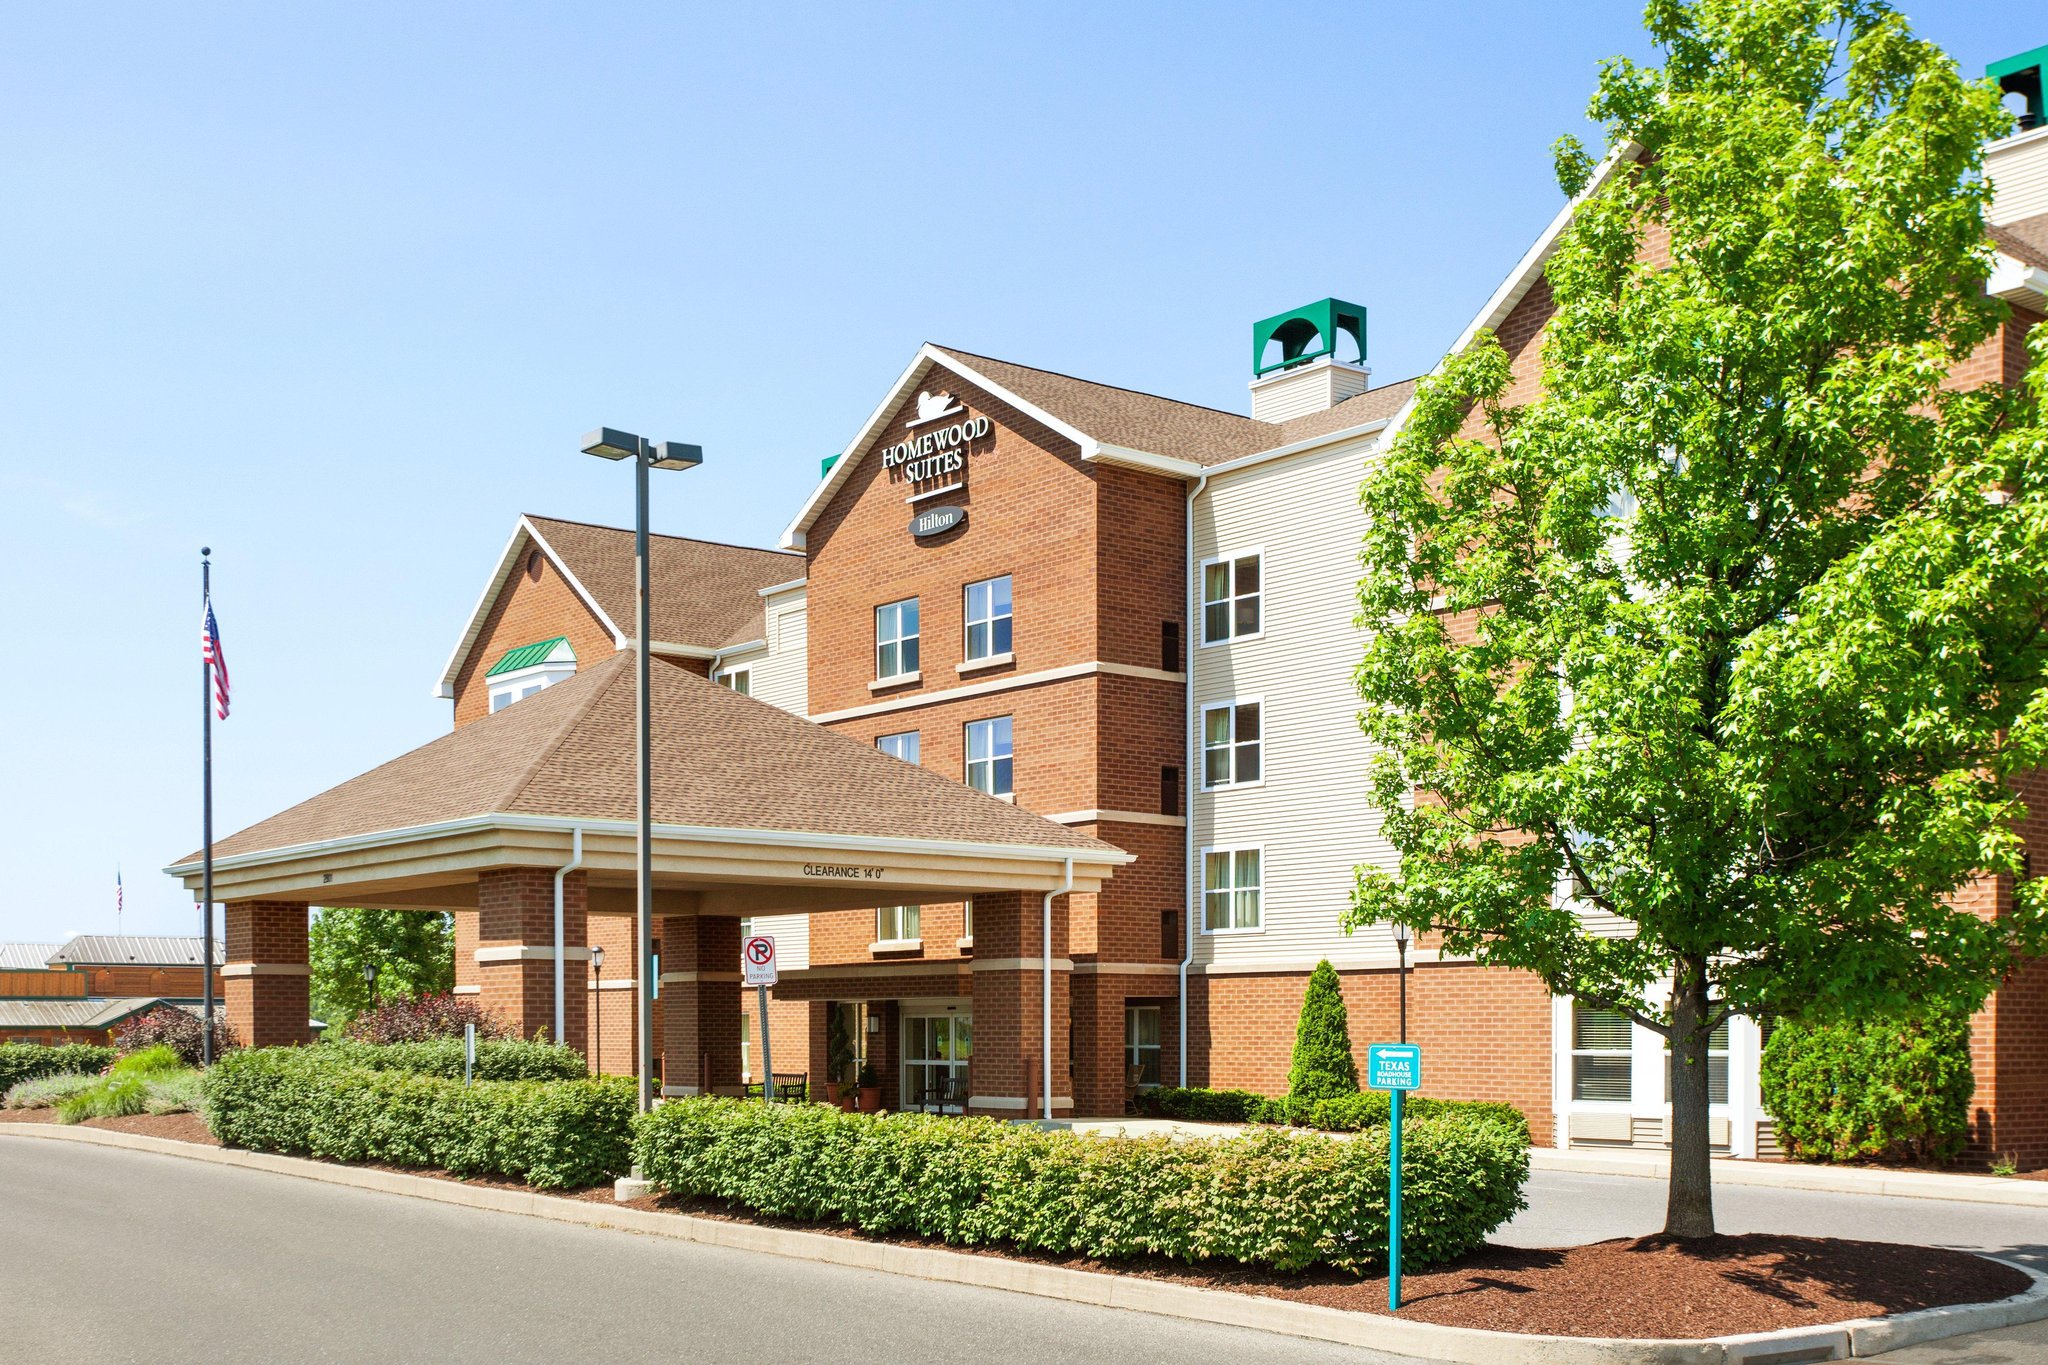 Photo of Homewood Suites by Hilton Reading, Reading, PA